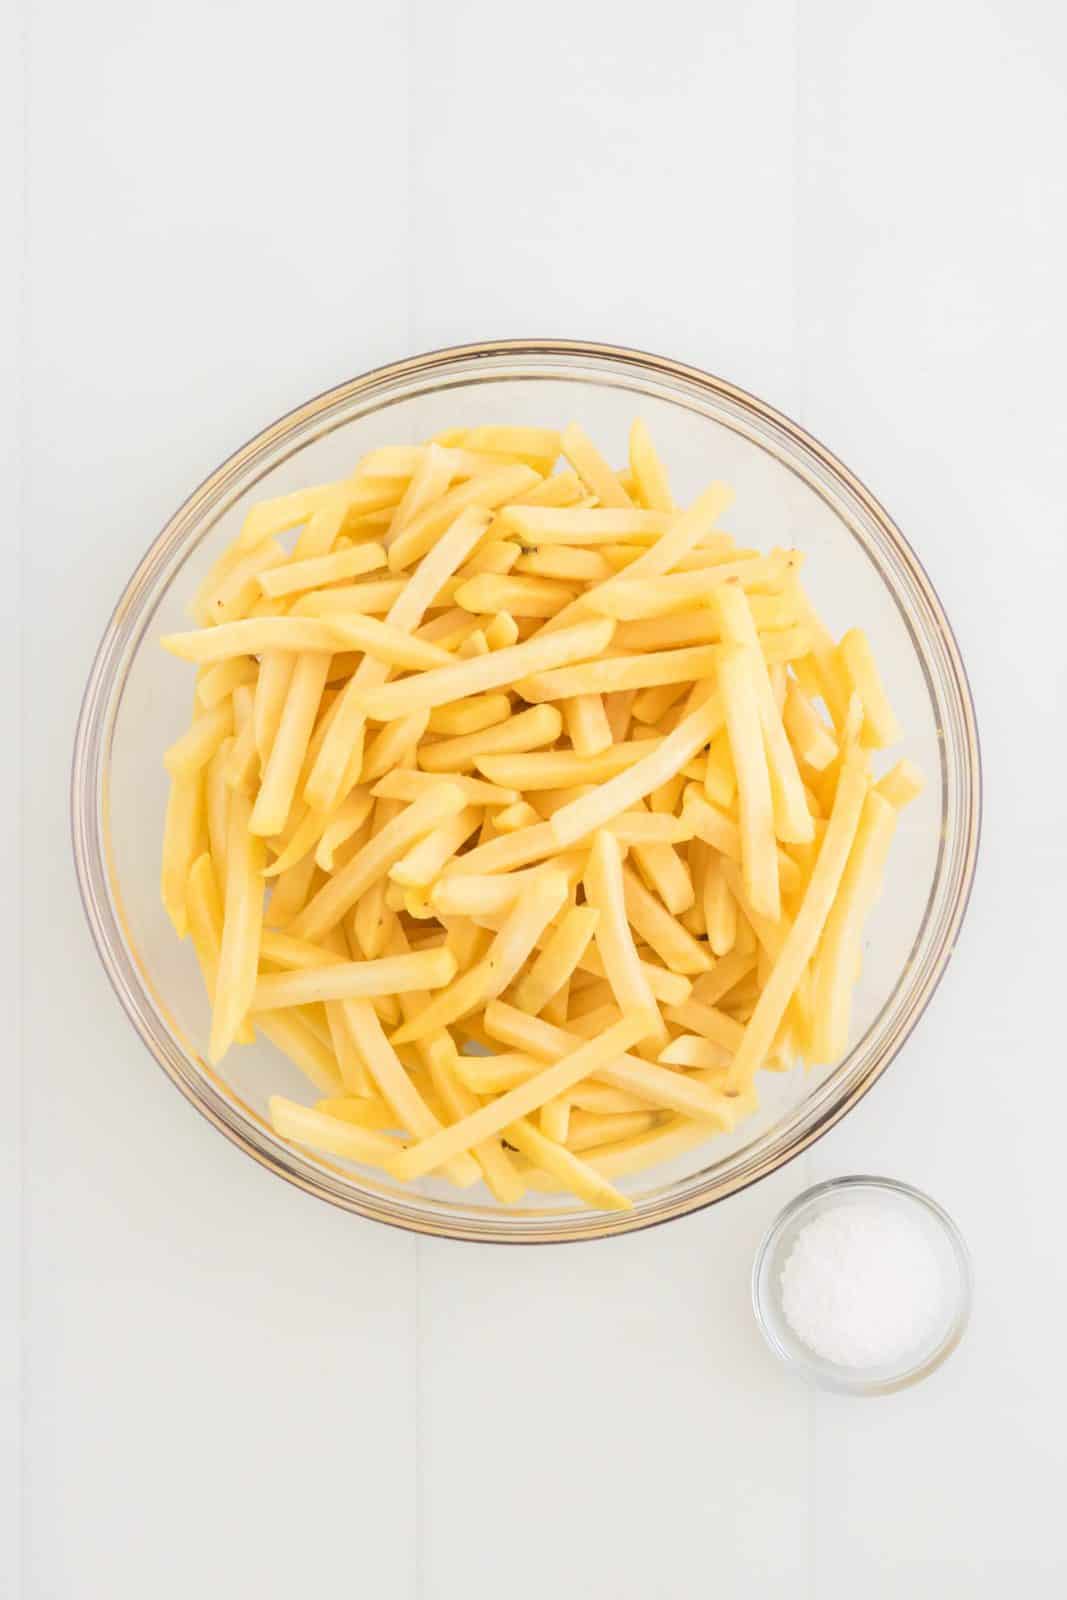 Ingredients needed: frozen french fries and salt.